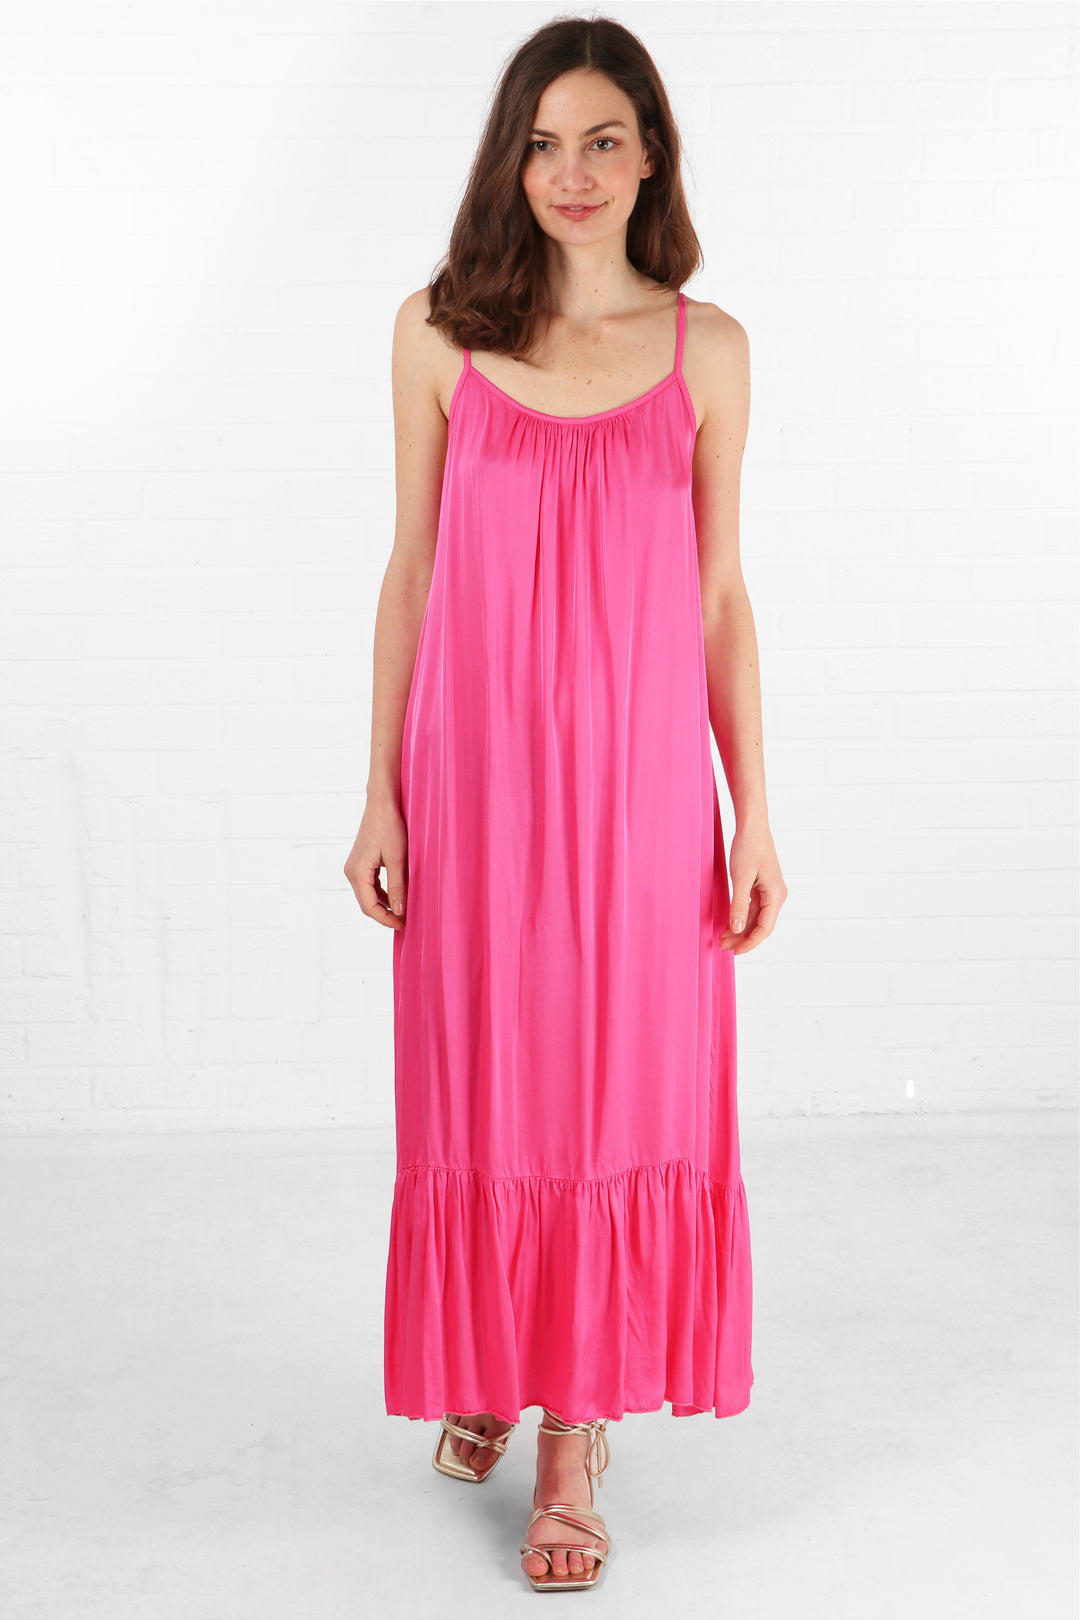 model wearing a hot pink tiered maxi dress with thin spaghetti staps